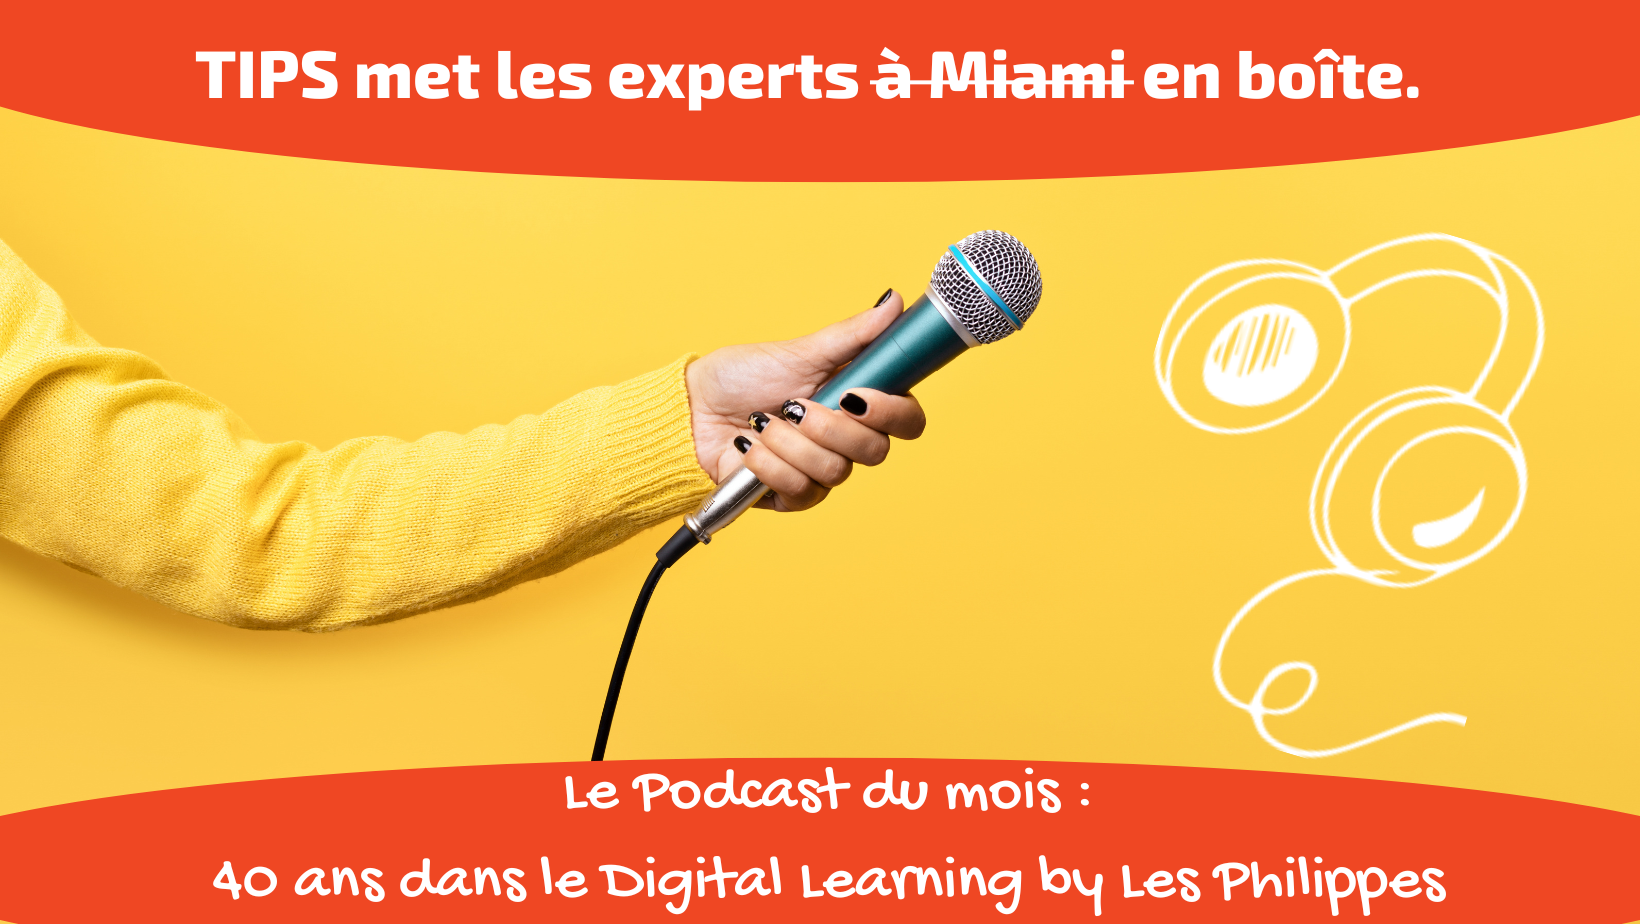 Podcast “40 ans dans le digital learning” by les Philippes